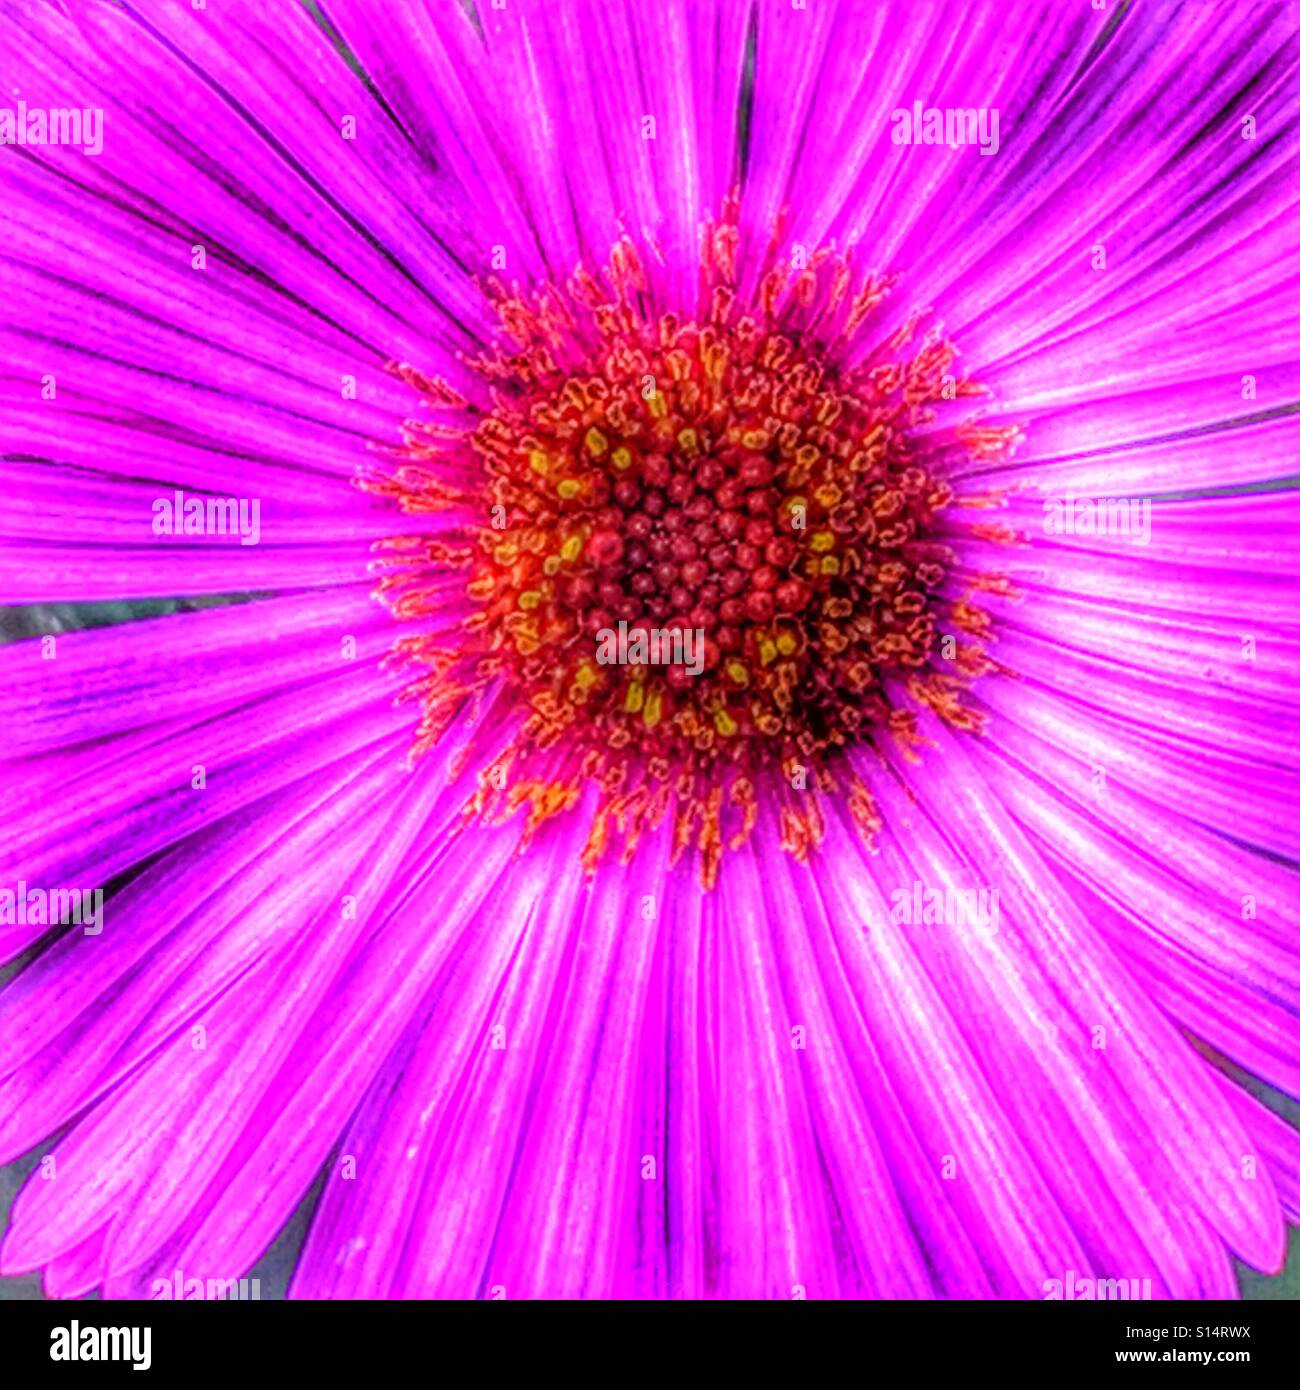 Pink Daisy flower, detail Stock Photo